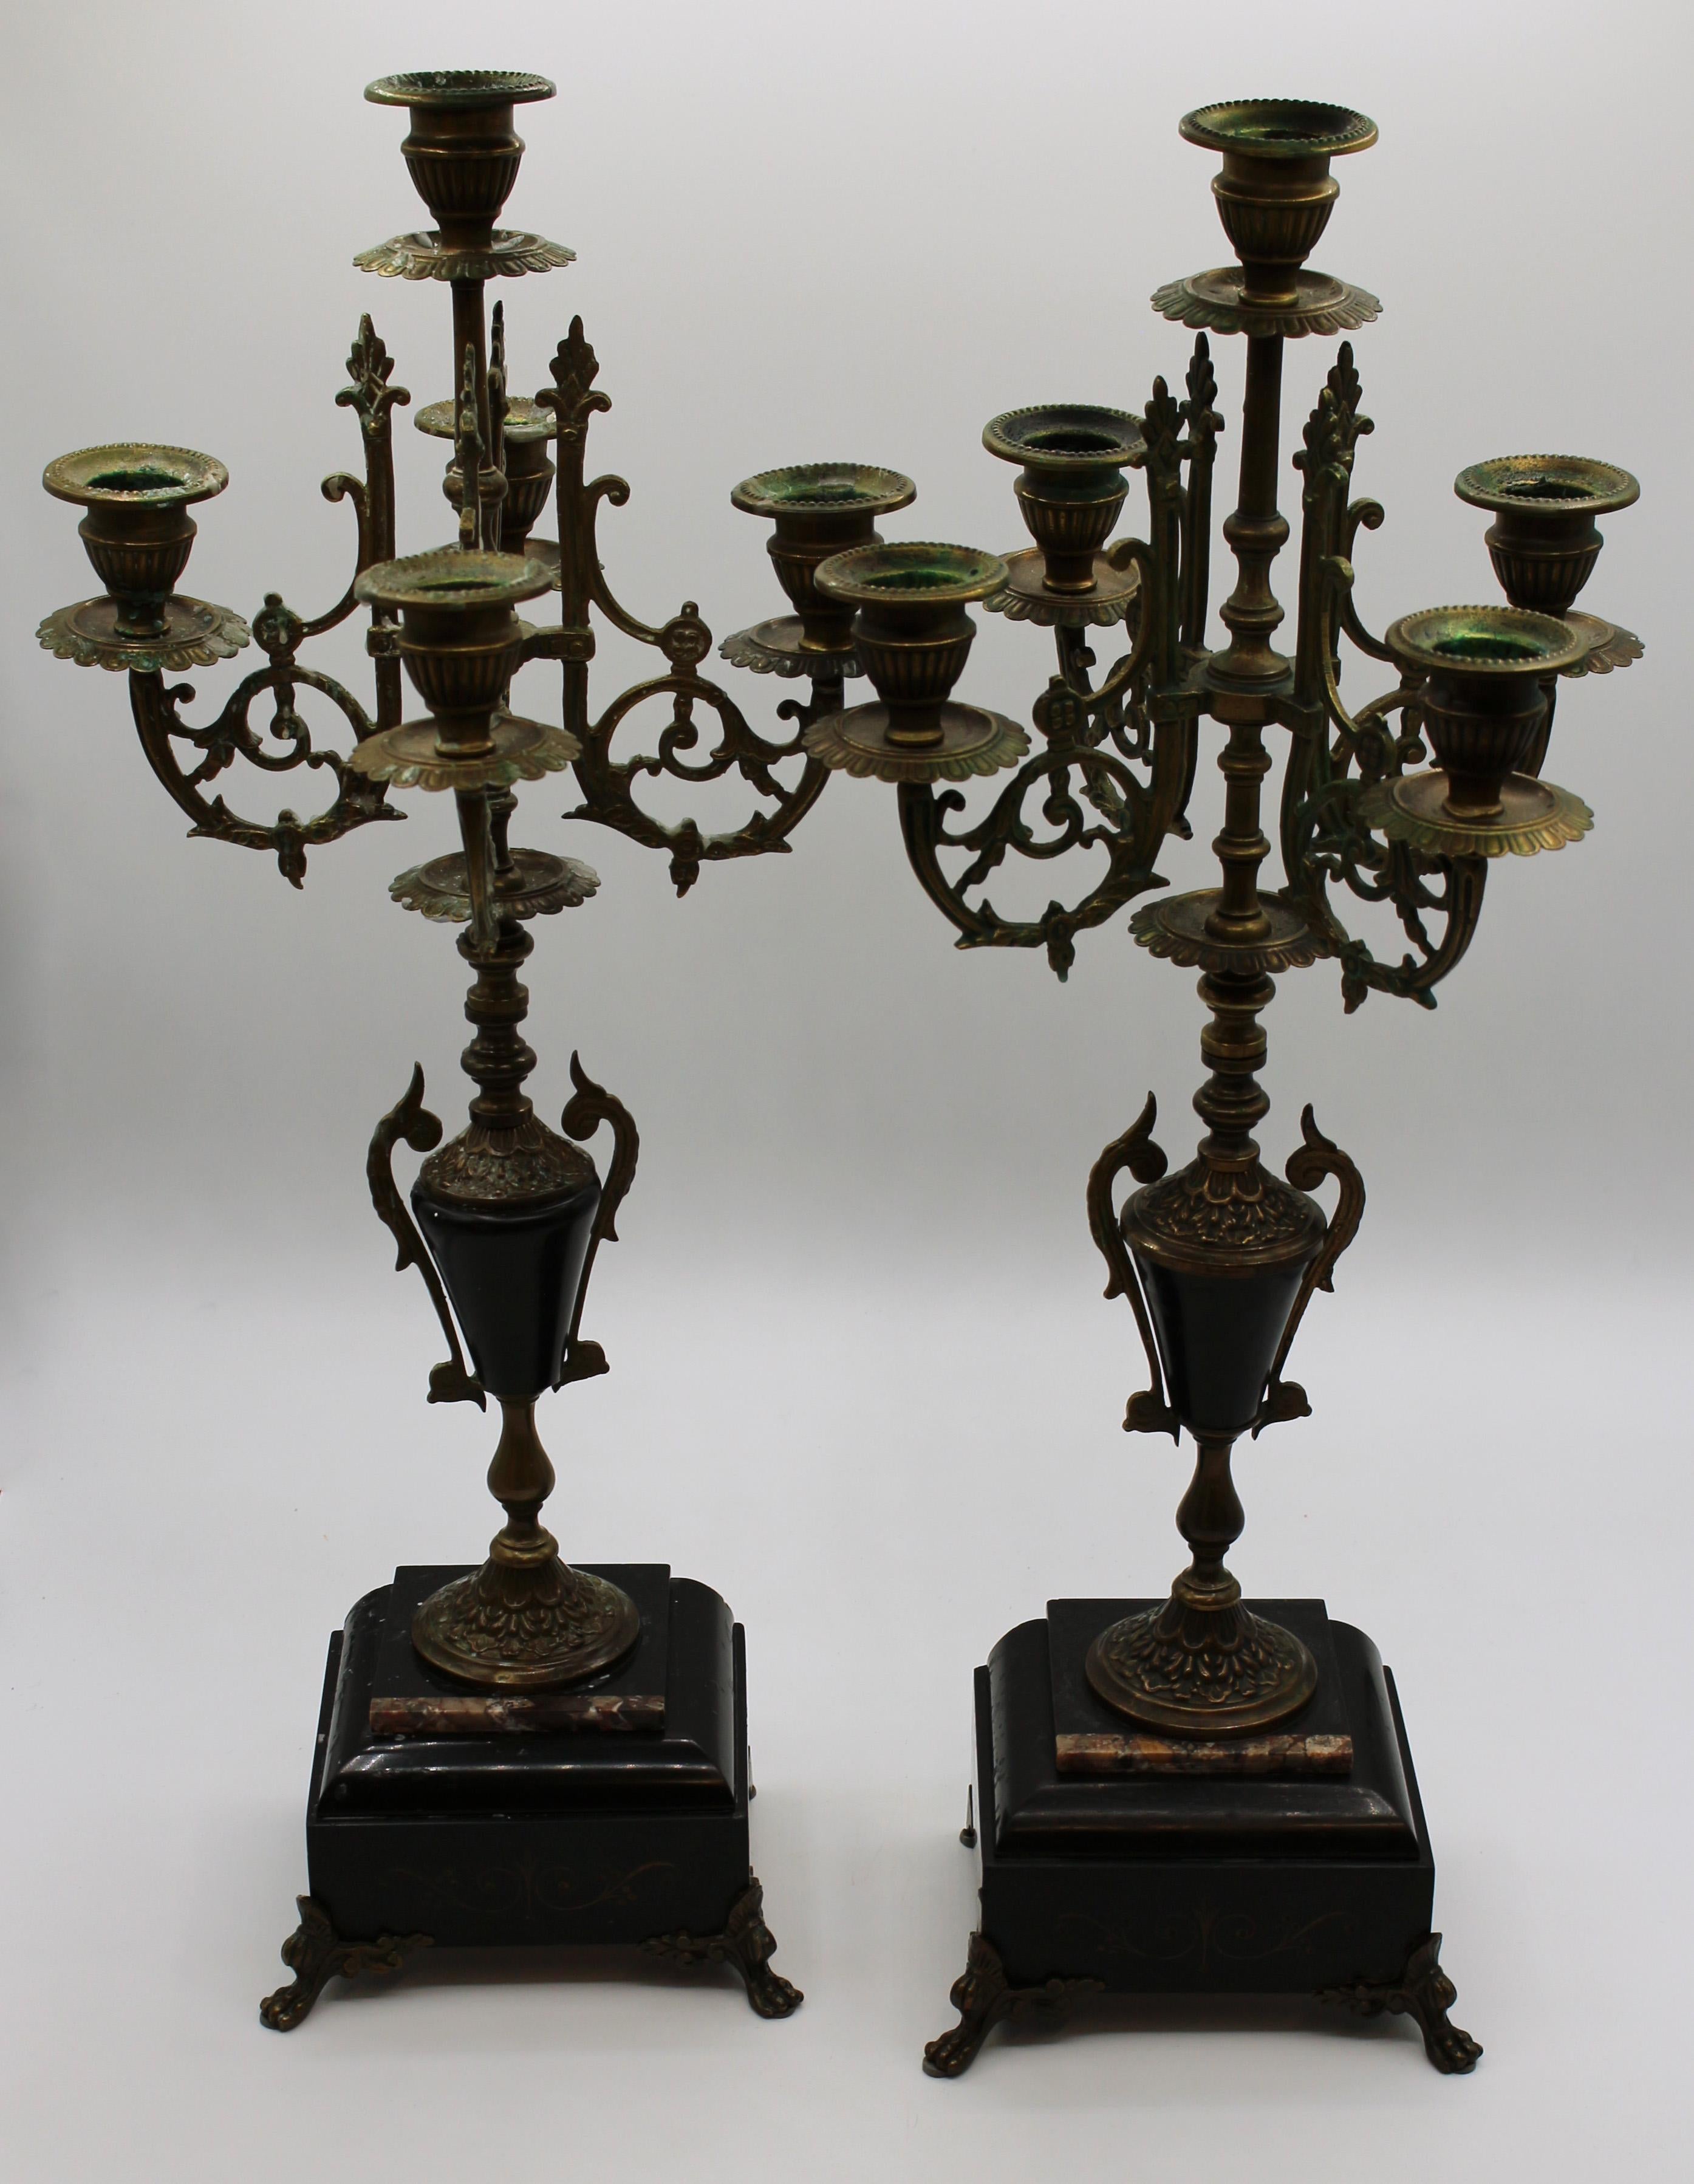 Circa 1870s Pair of Black Slate and Brass Candelabras 5